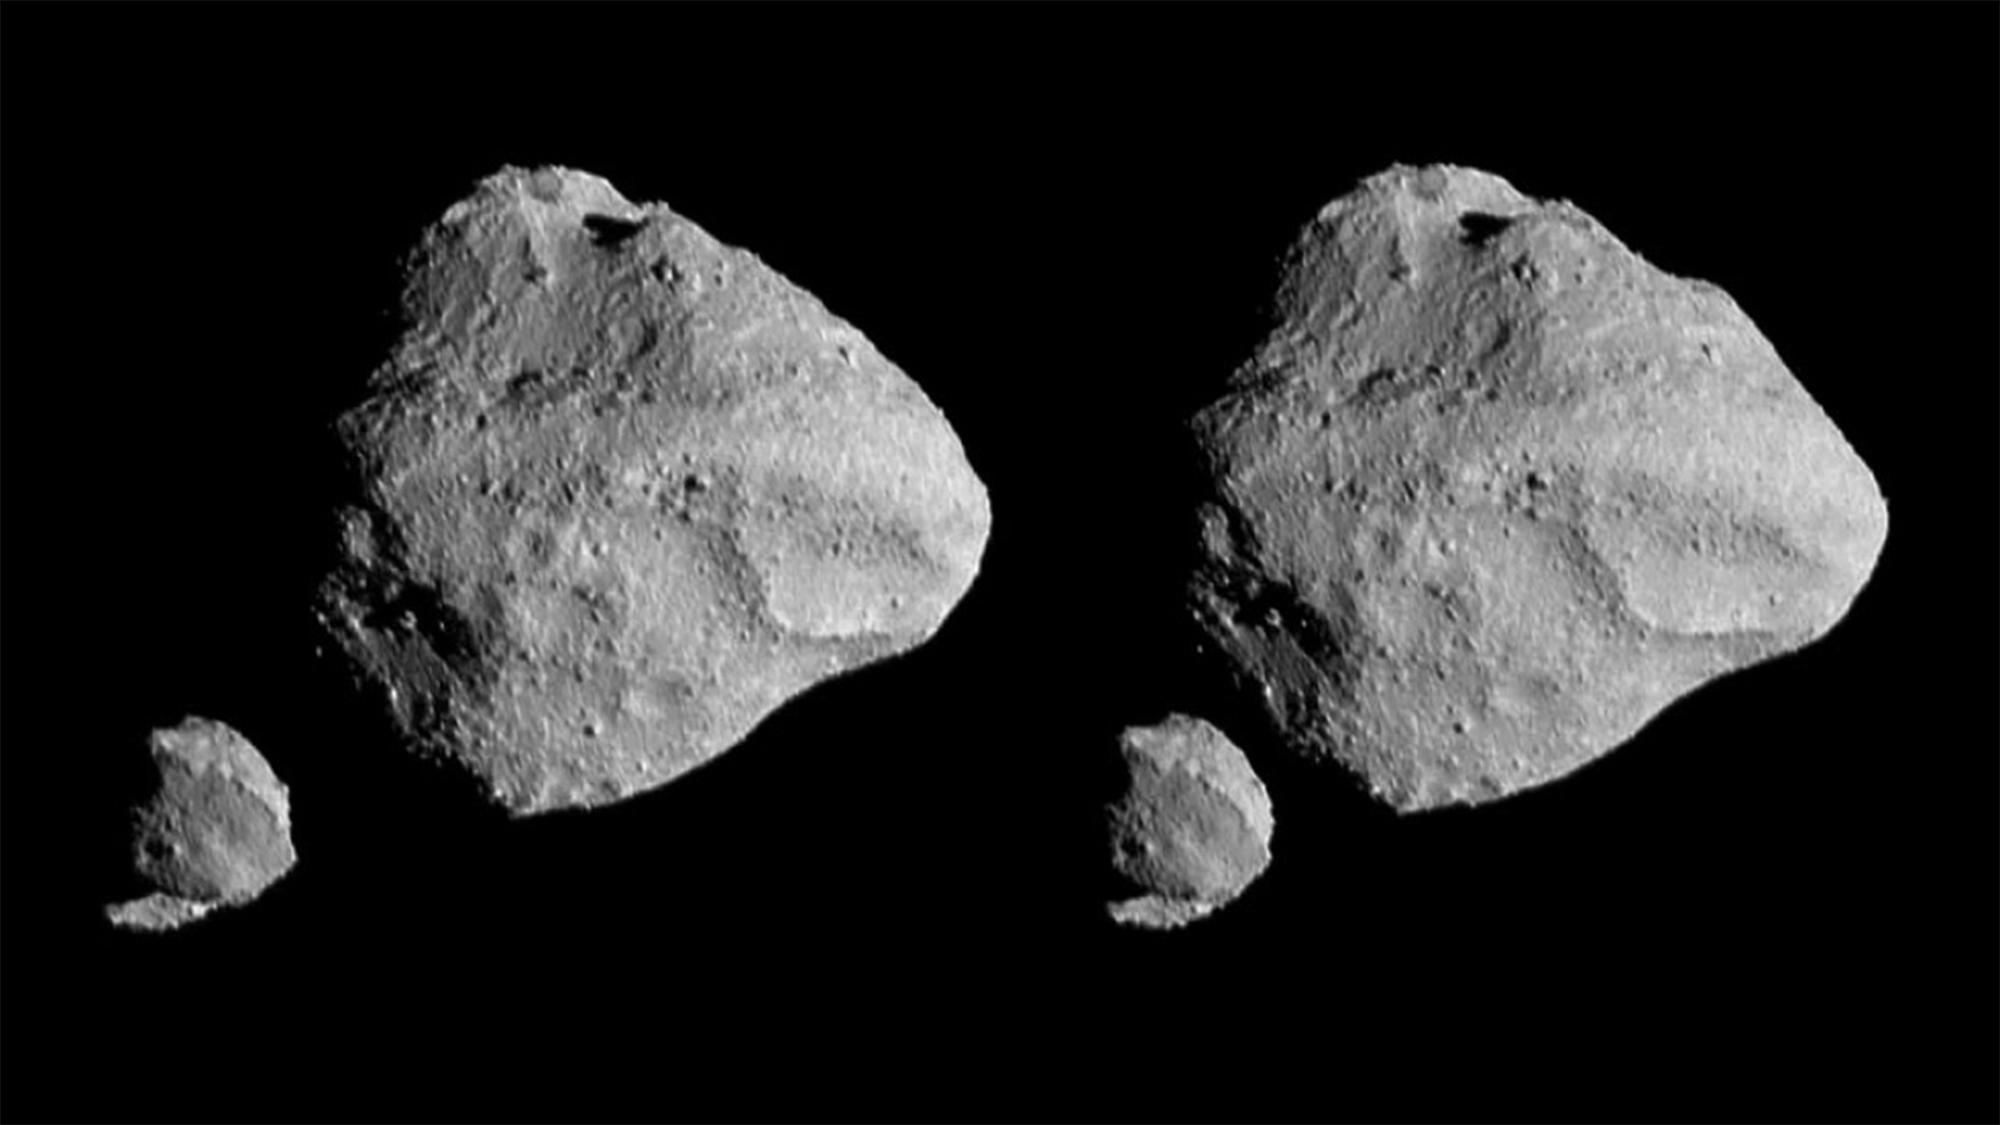 ‘Lucy’s baby’ asteroid is only about 2 to 3 million years old